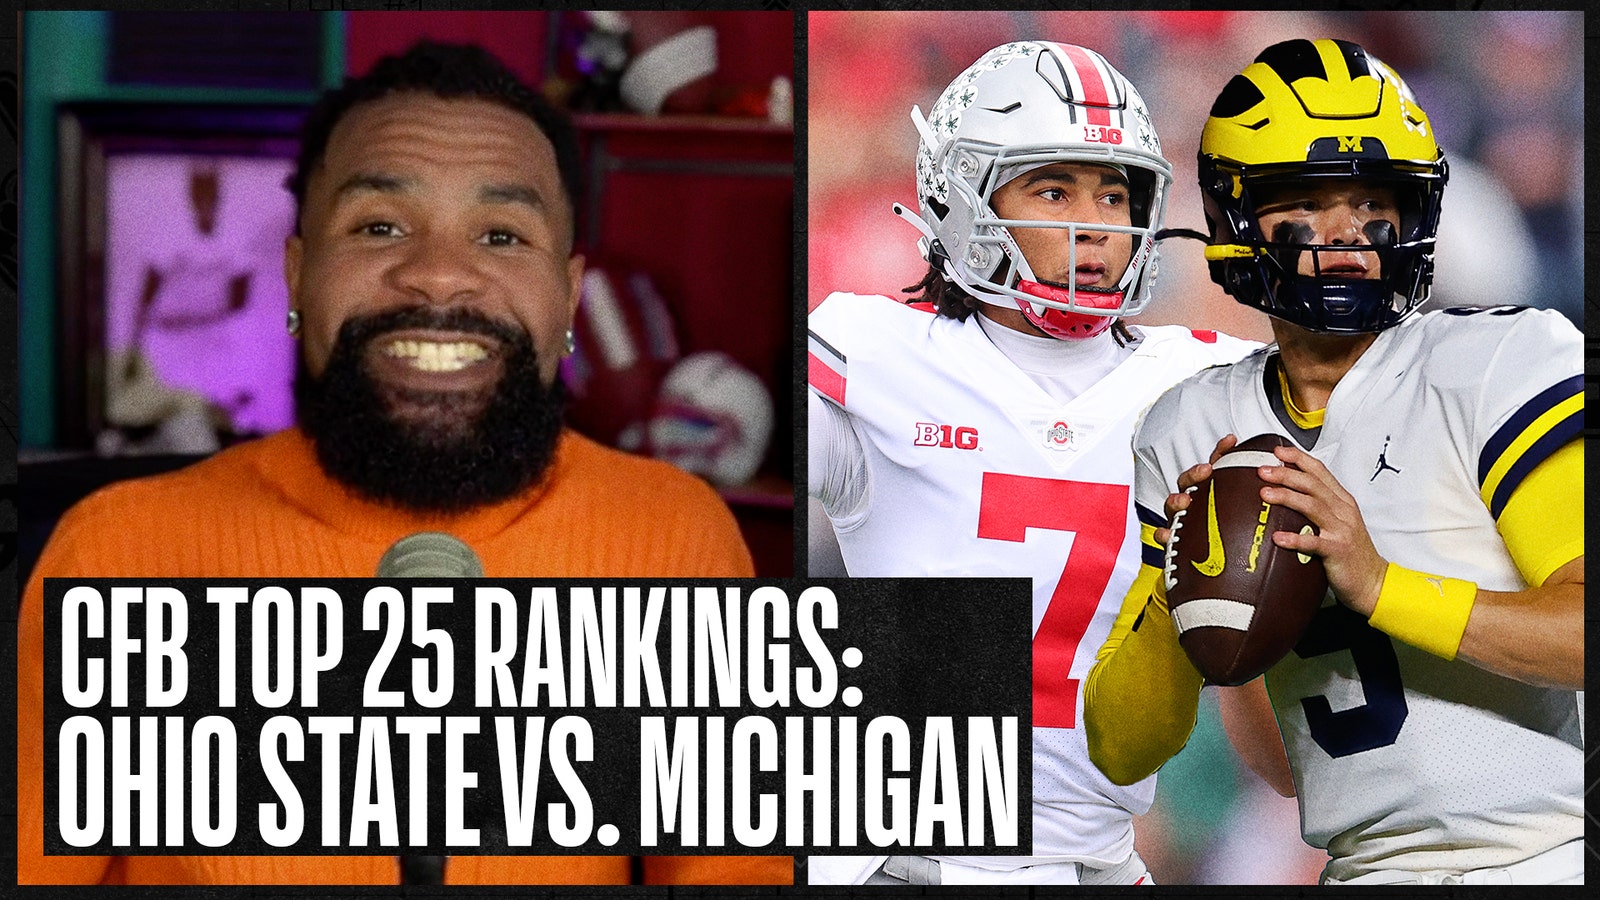 Ohio State and Michigan are on a collision course